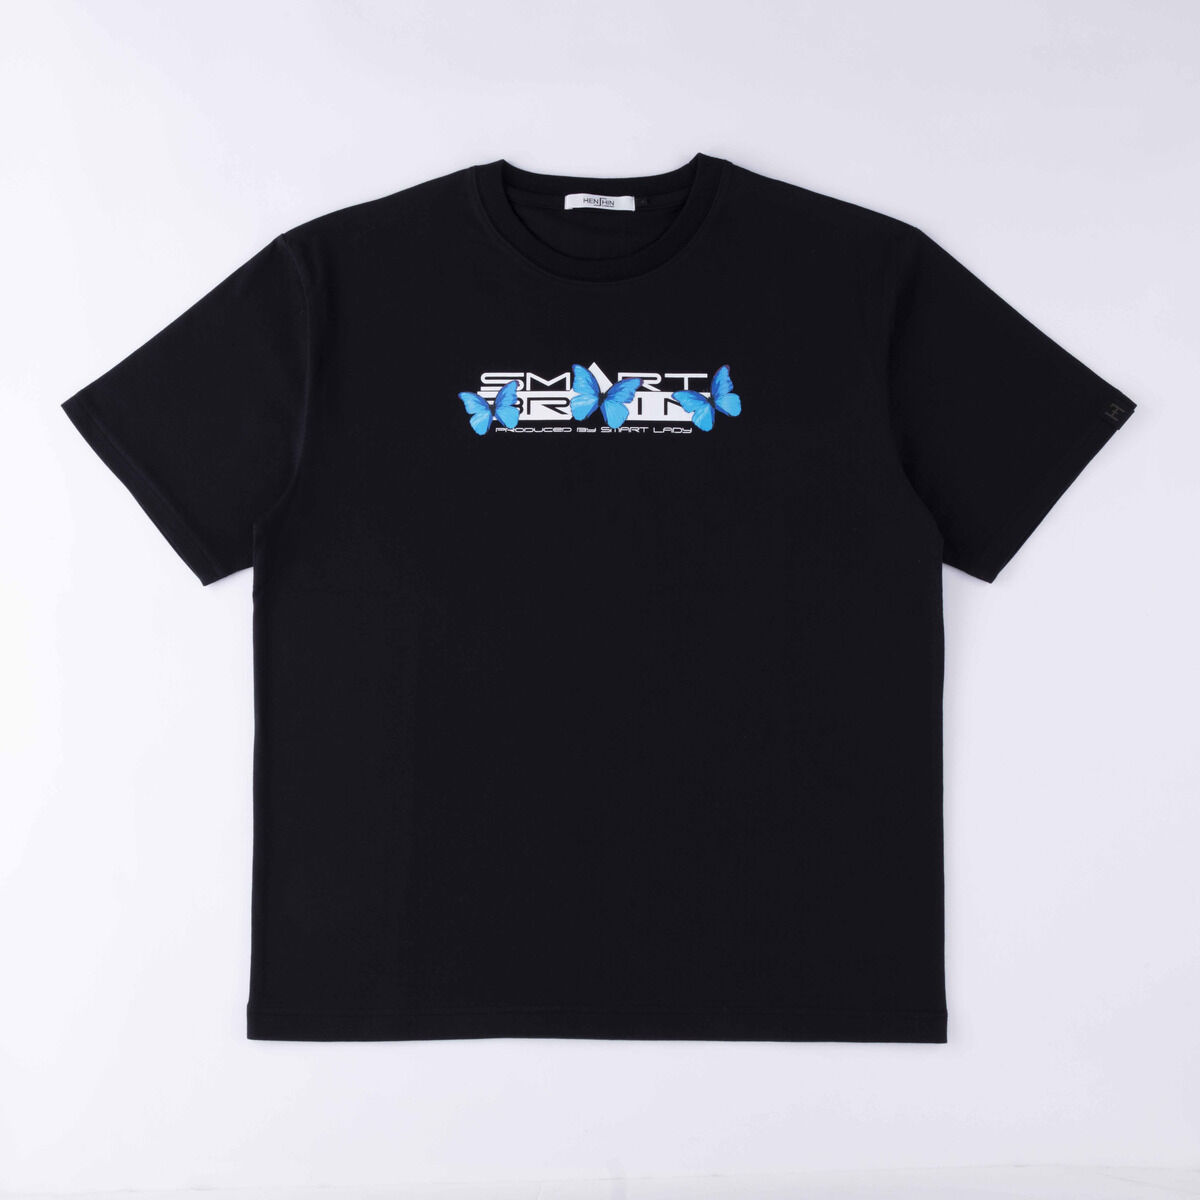 NEGLECT ADULT PATiENTS 仮面ライダー555 Tシャツ - Tシャツ ...